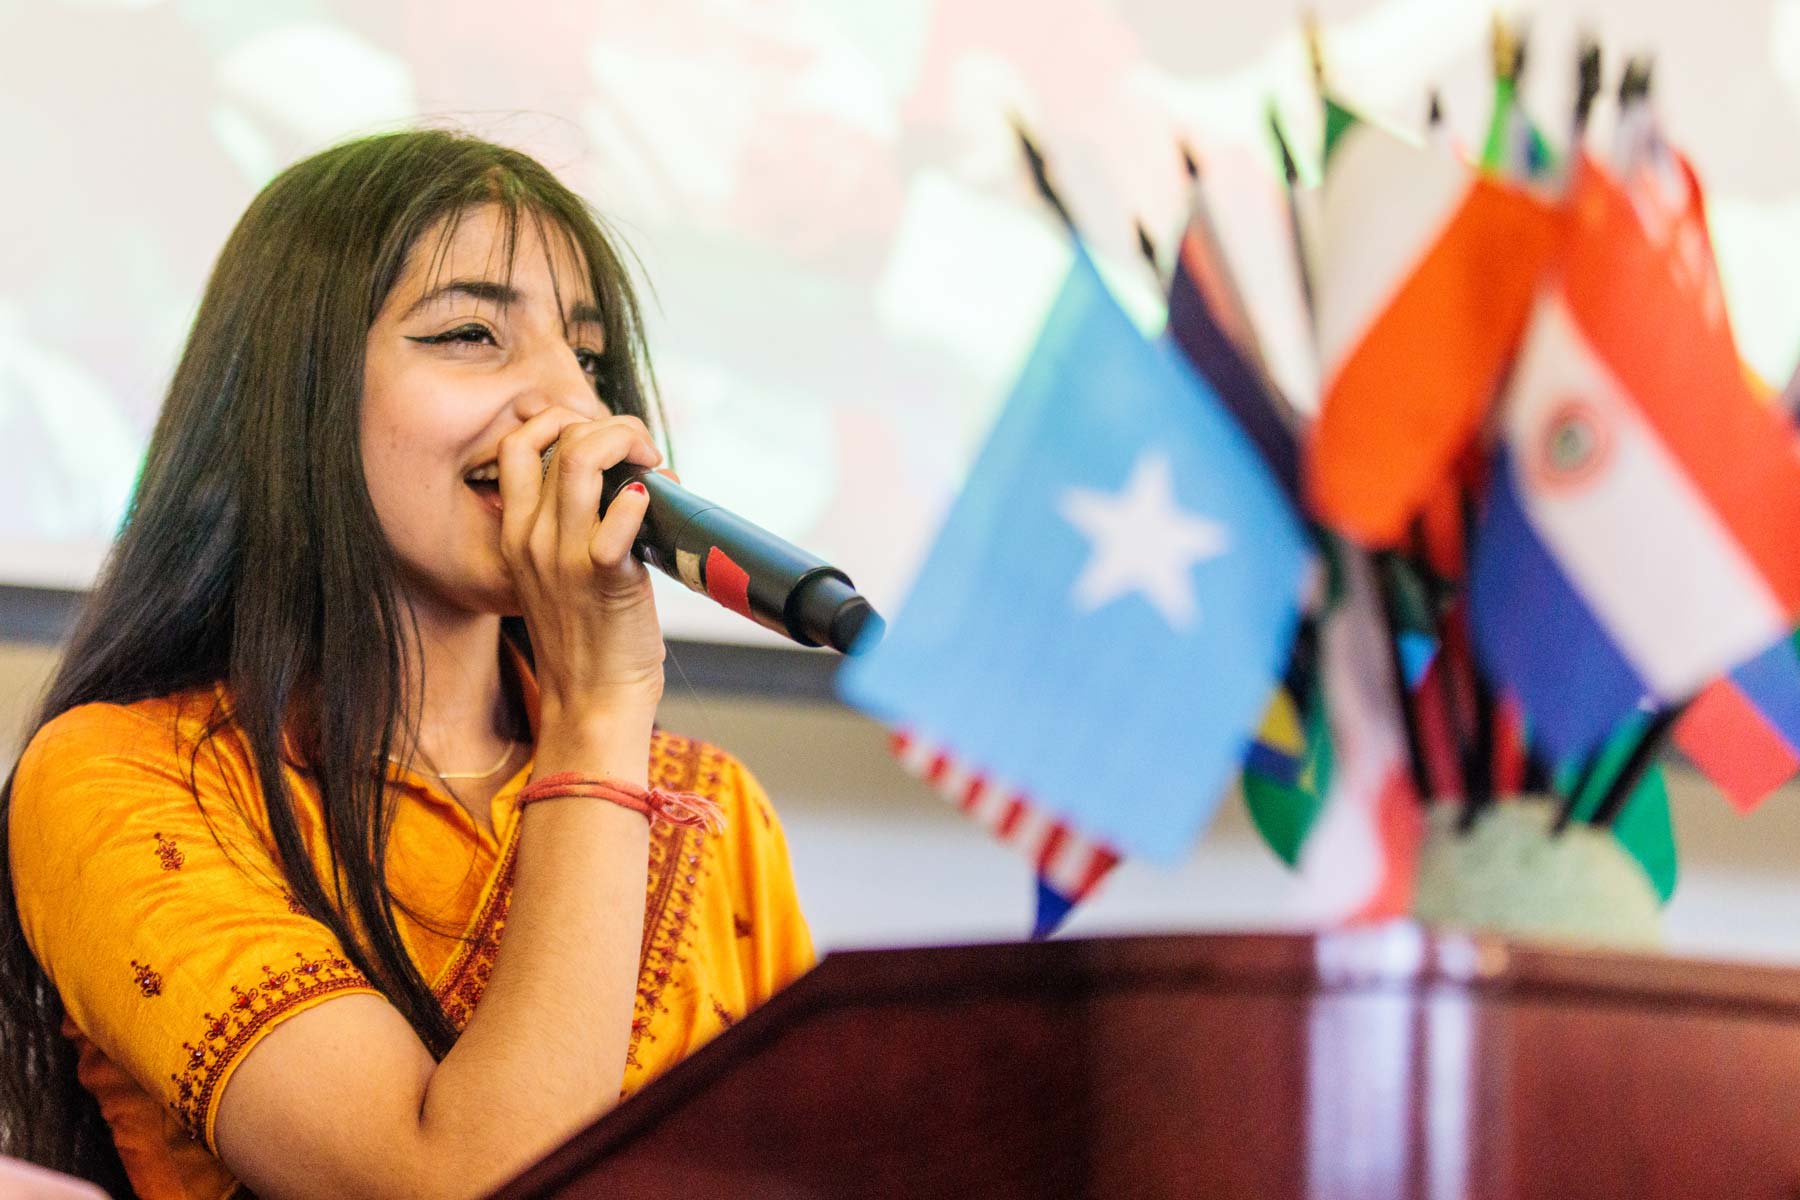 International student speaking at a public campus event.